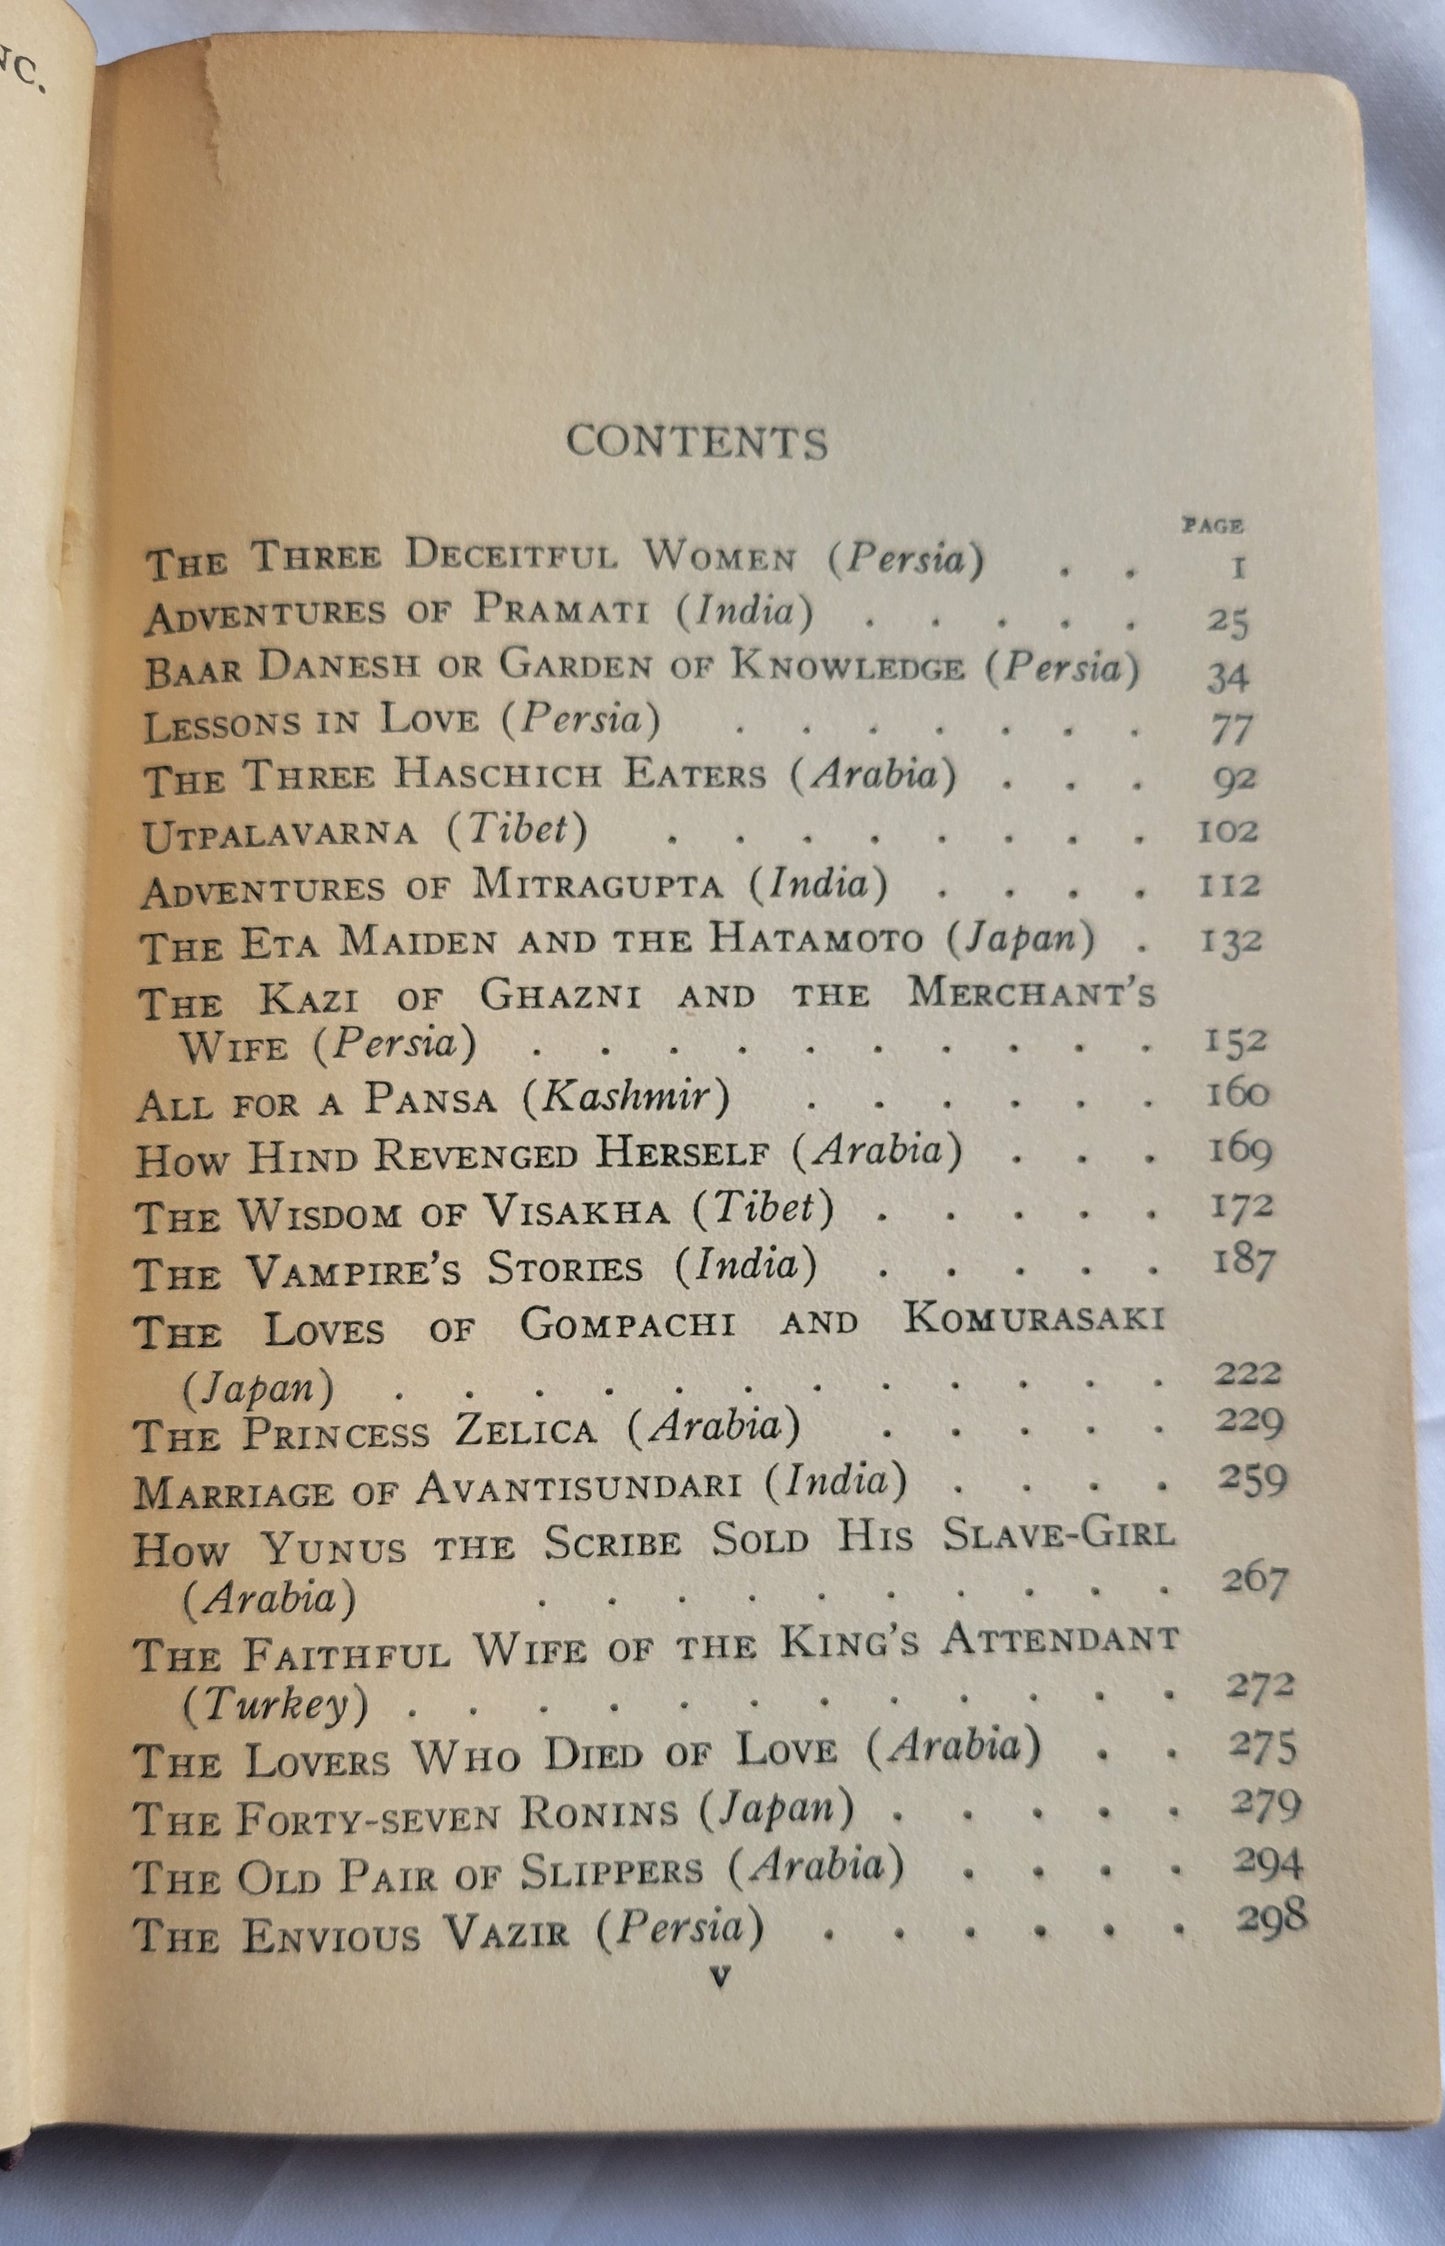 Vintage book for sale, "Oriental Romances" First Edition, edited and introduction by Manuel Komroff, published by The Modern Library in 1930. View of table of contents